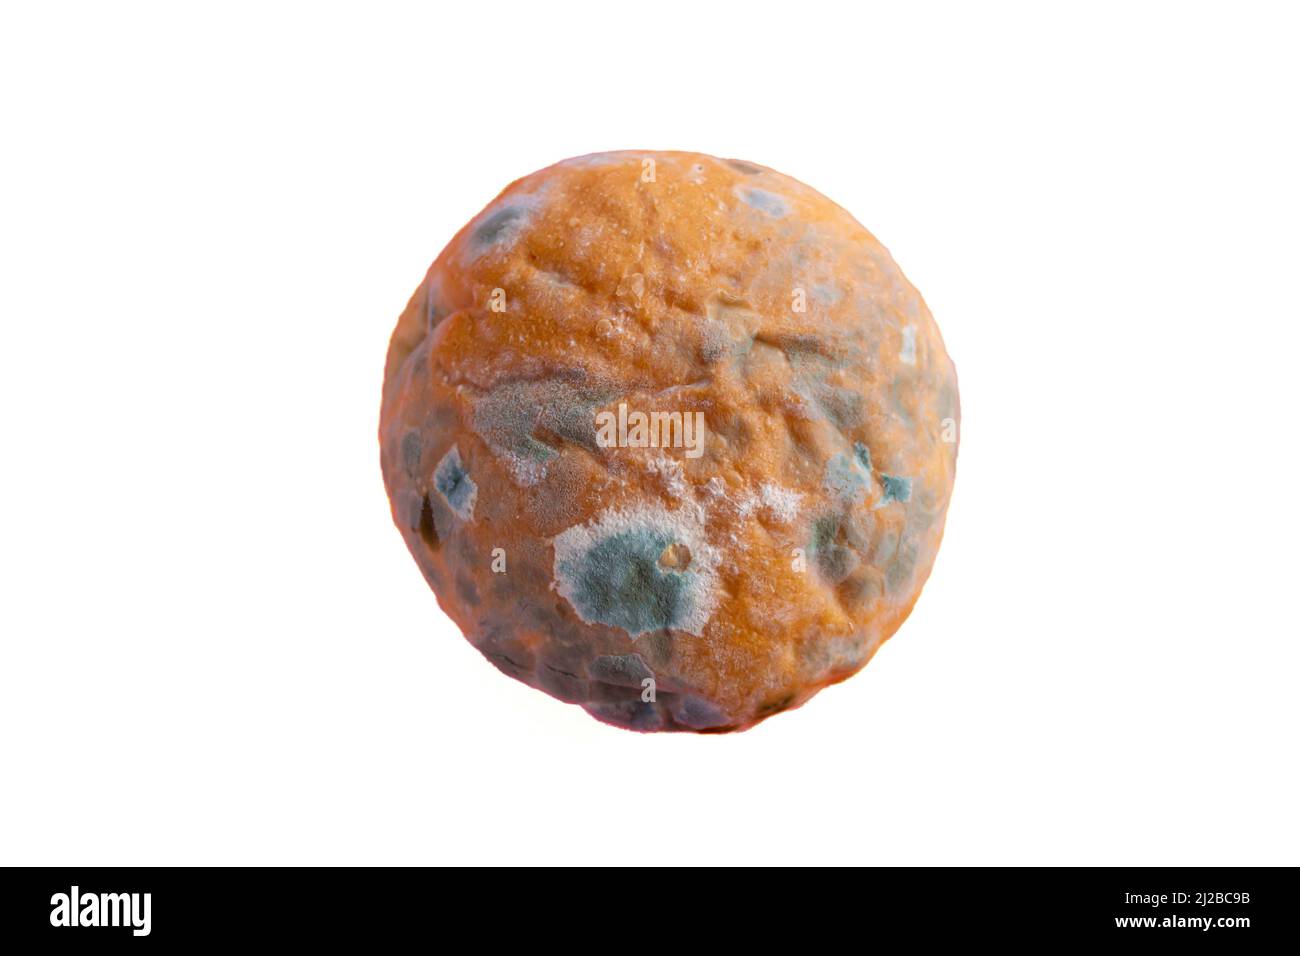 Top view moldy bread isolated on white background. Rotten bread. Mildew covered food. Stock Photo